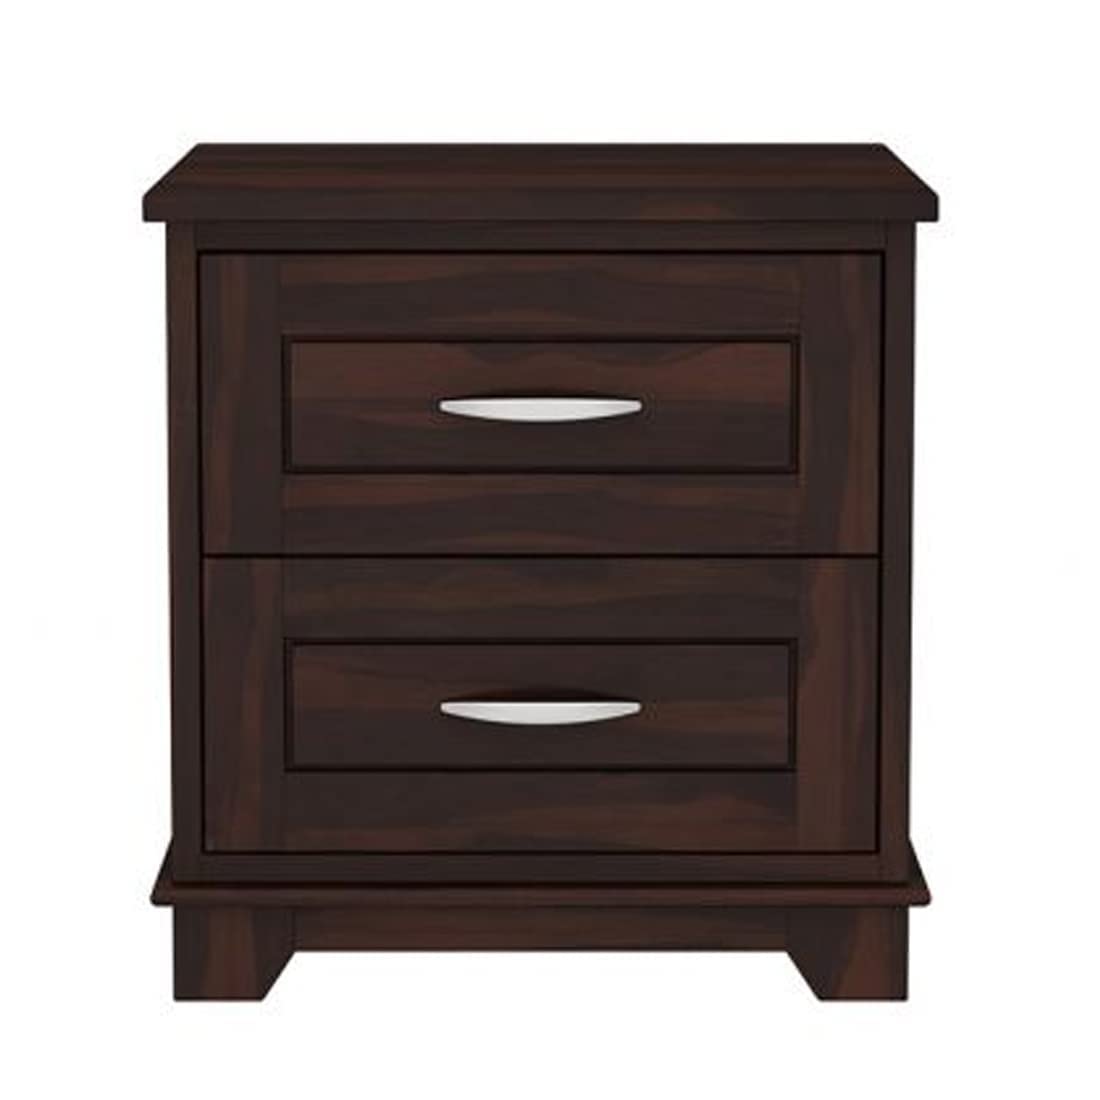 Woodmarwar Sheesham Wood Bedside Table for Bedroom | Solid Pure Wooden Bed Side Nightstand End Table with 2 Drawer Storage for Home & Bed Room